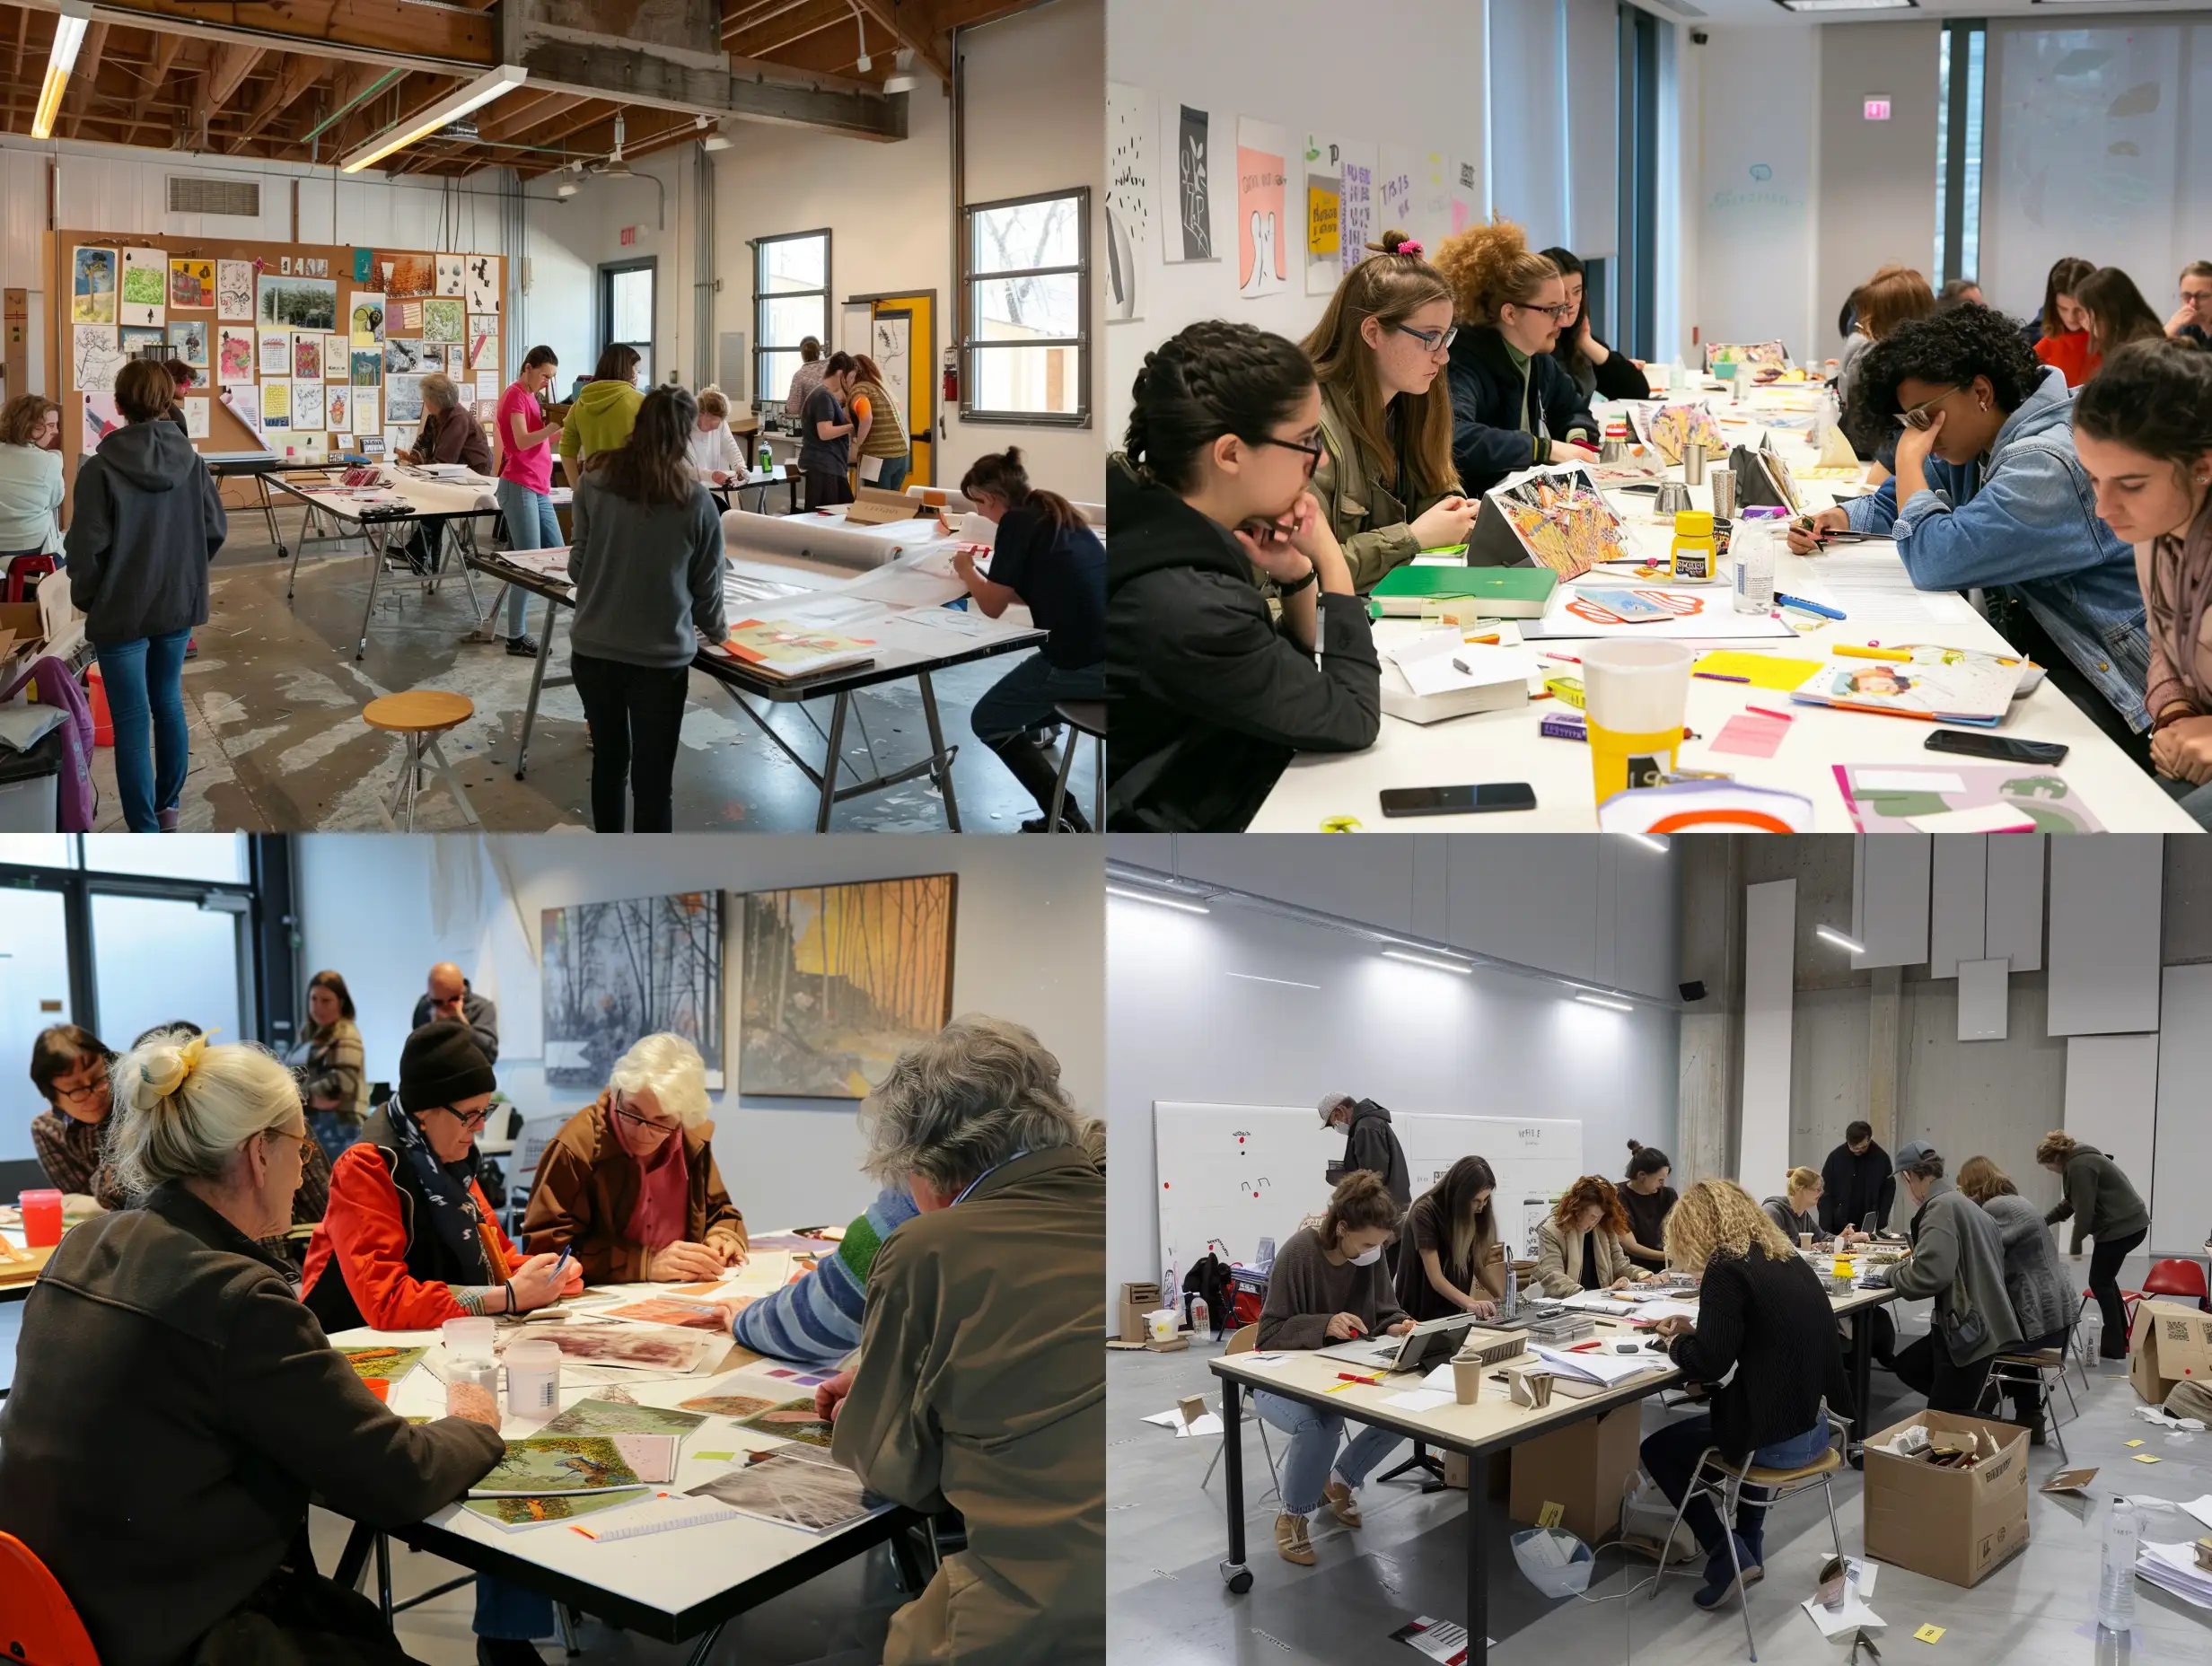 Community-Workshop-with-Citizens-Collaborating-on-Project